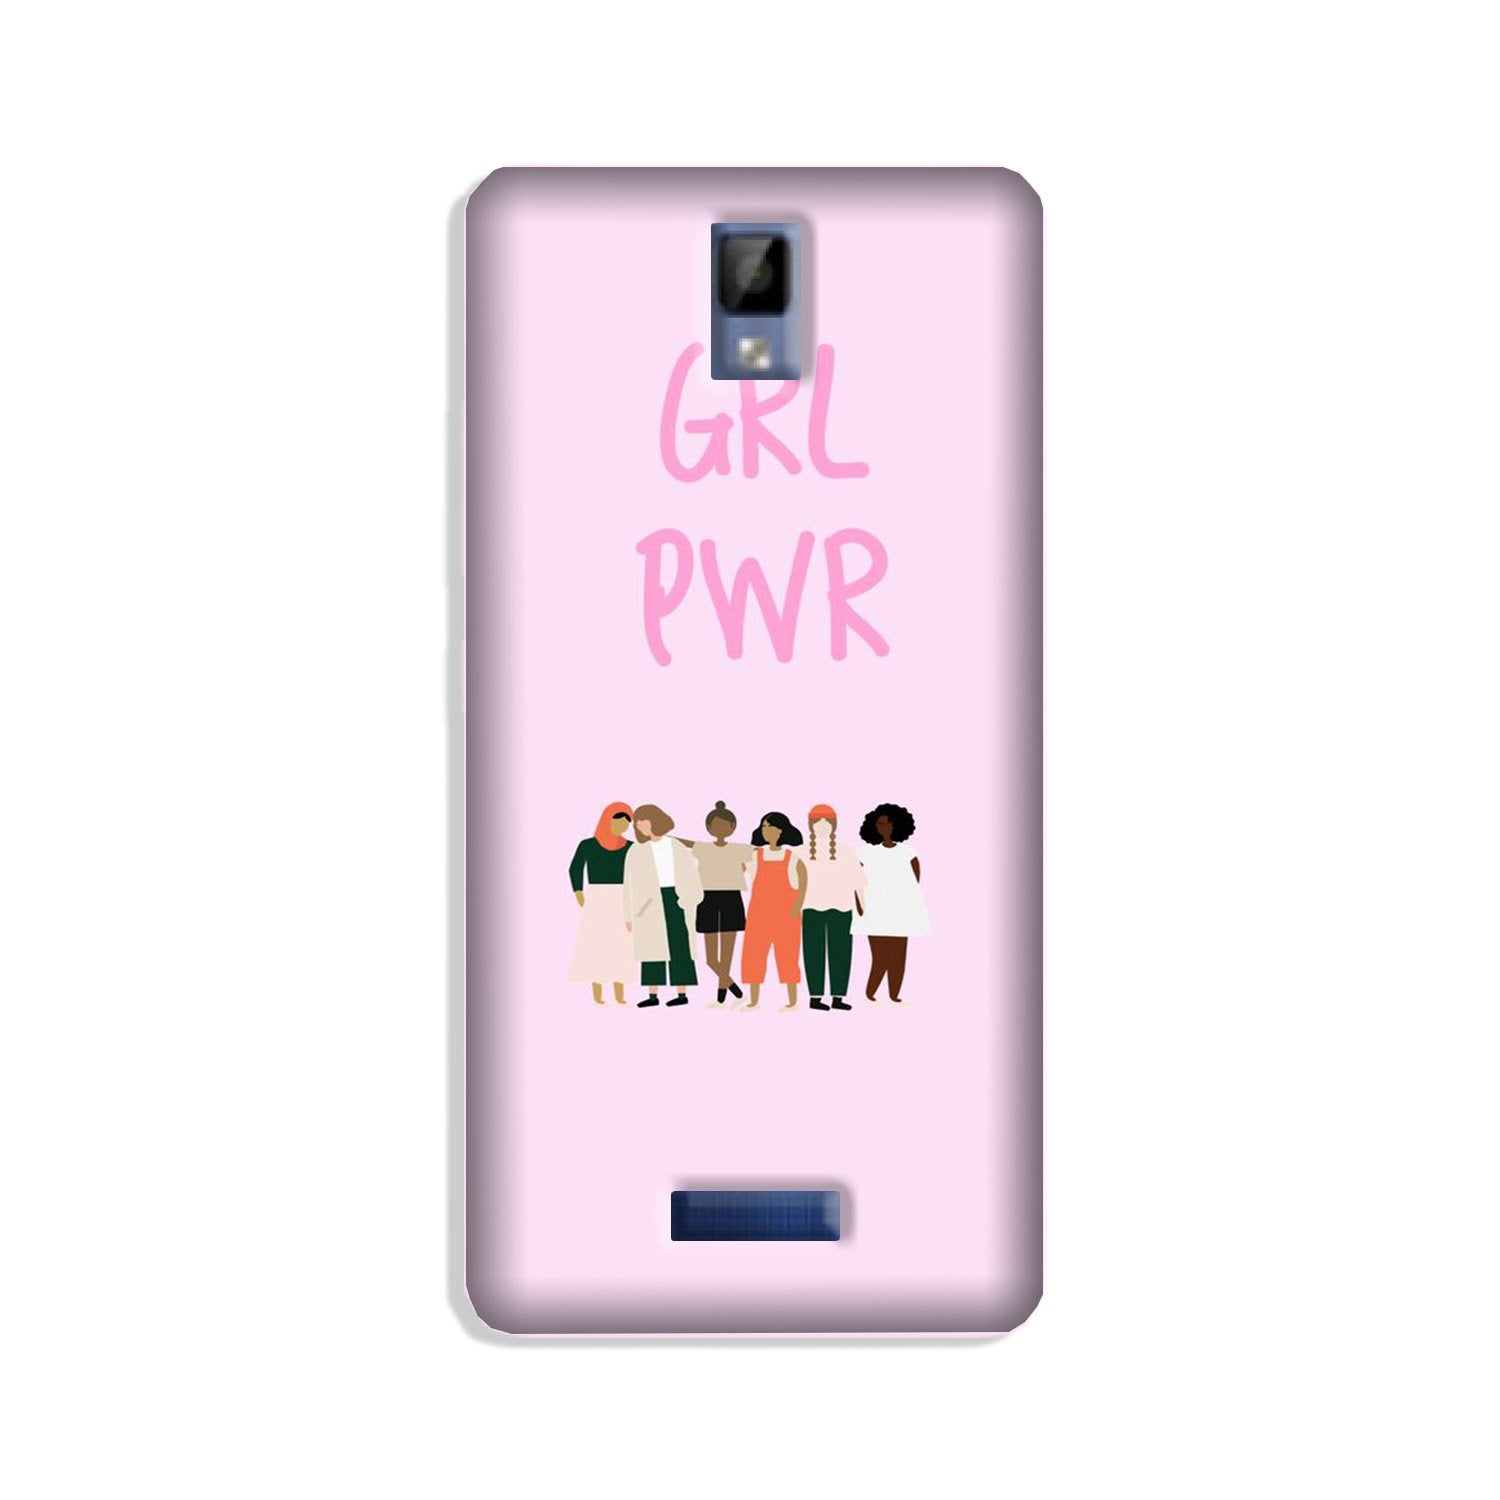 Girl Power Case for Gionee P7 (Design No. 267)